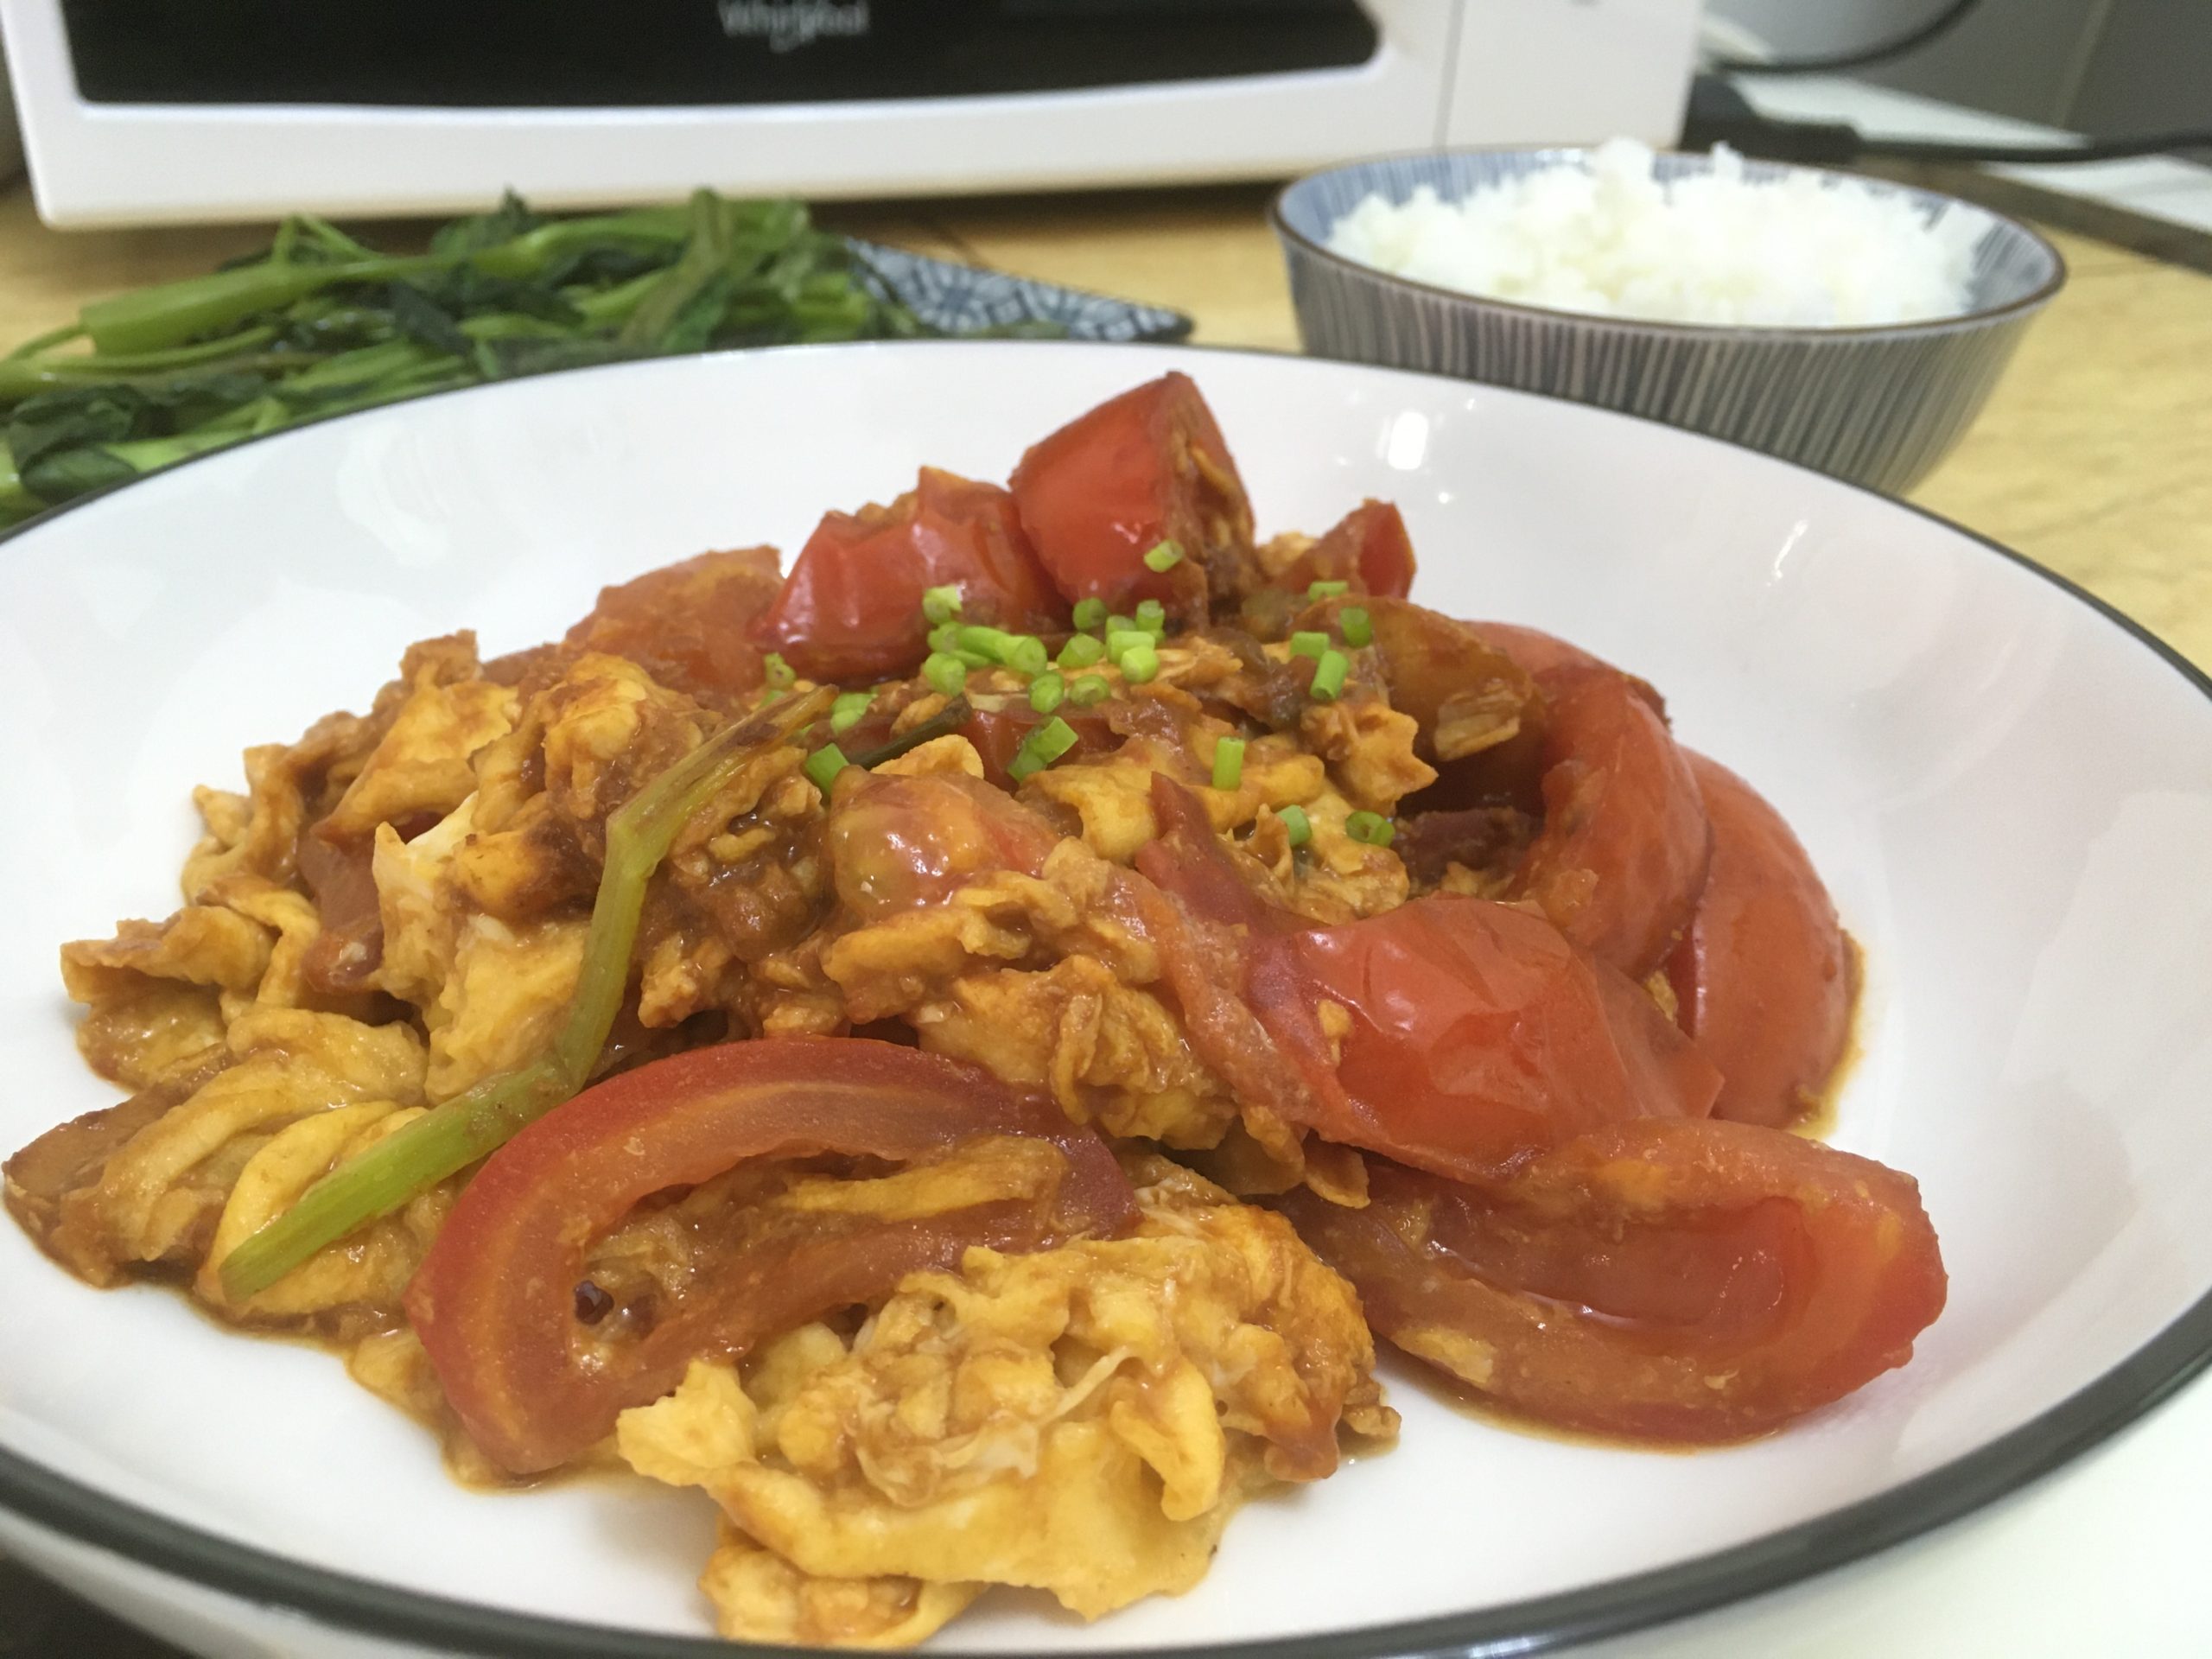 Quick and Easy Tomato and Eggs Stir Fry – The Power of Sweet and Sour